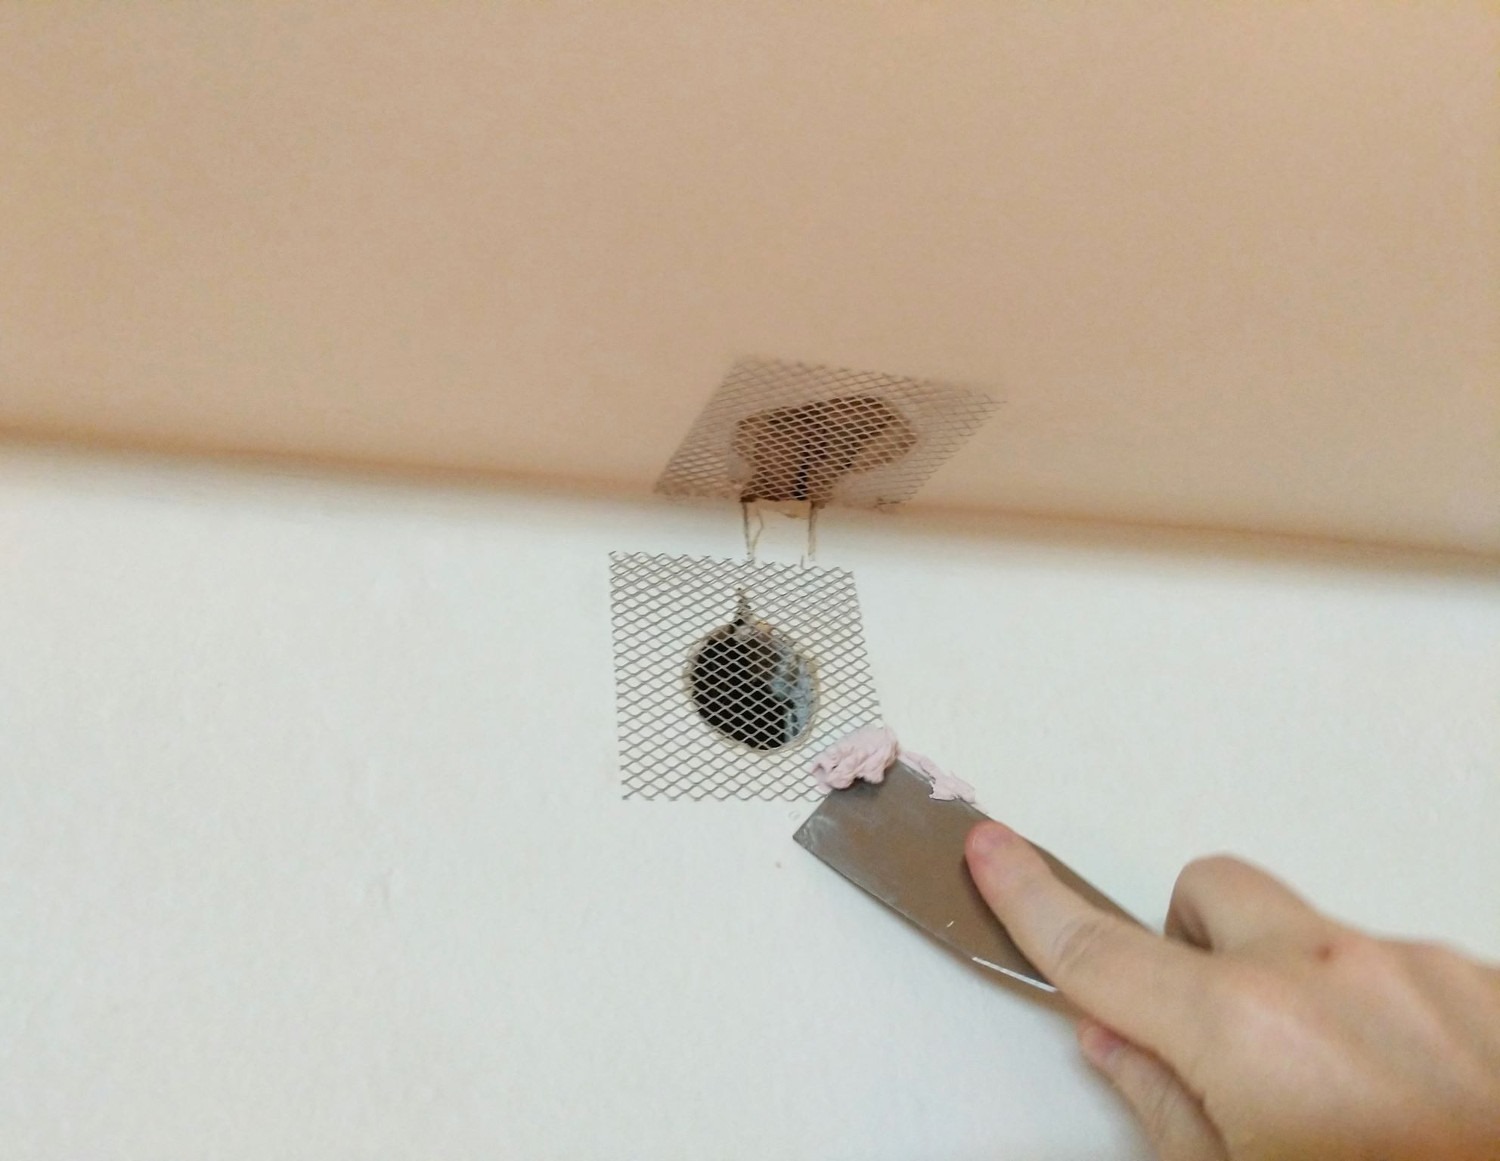 a person applying putty with a putty knife to a wire mesh patch over a hole in drywall